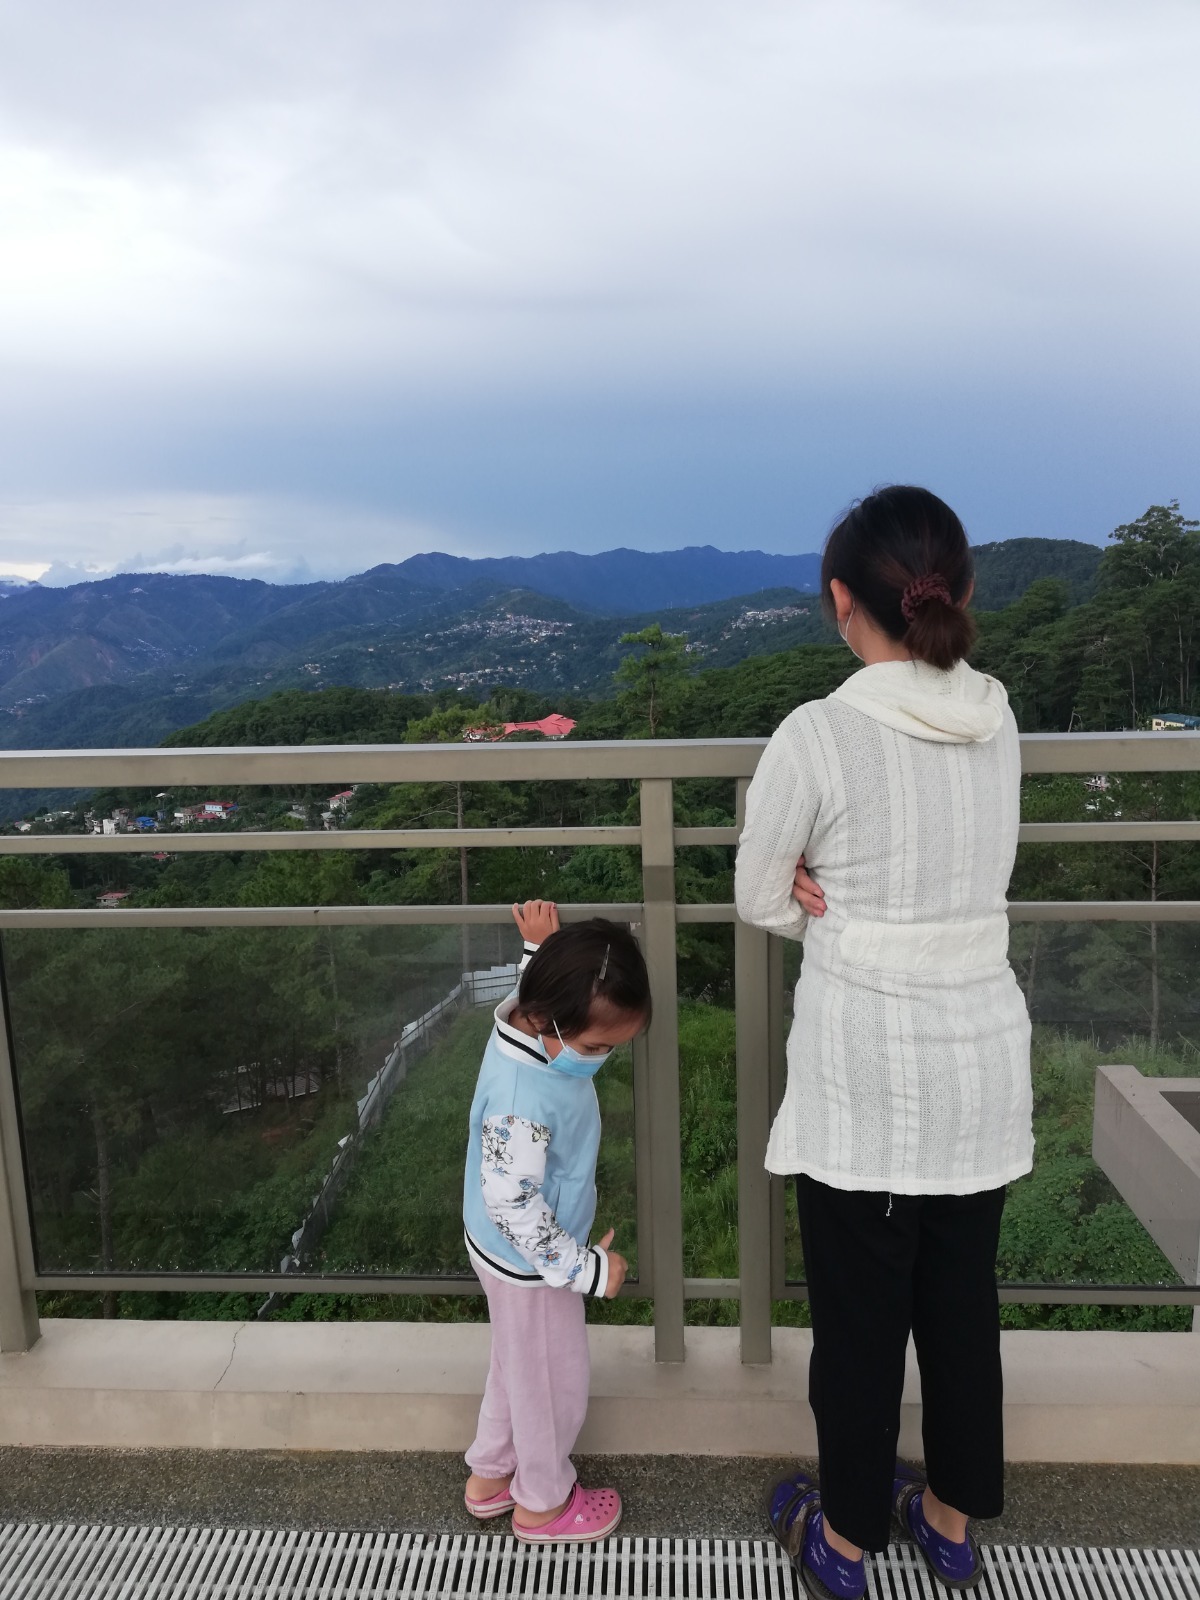 Mother and daughter are looking at the outside scenery from the rooftop